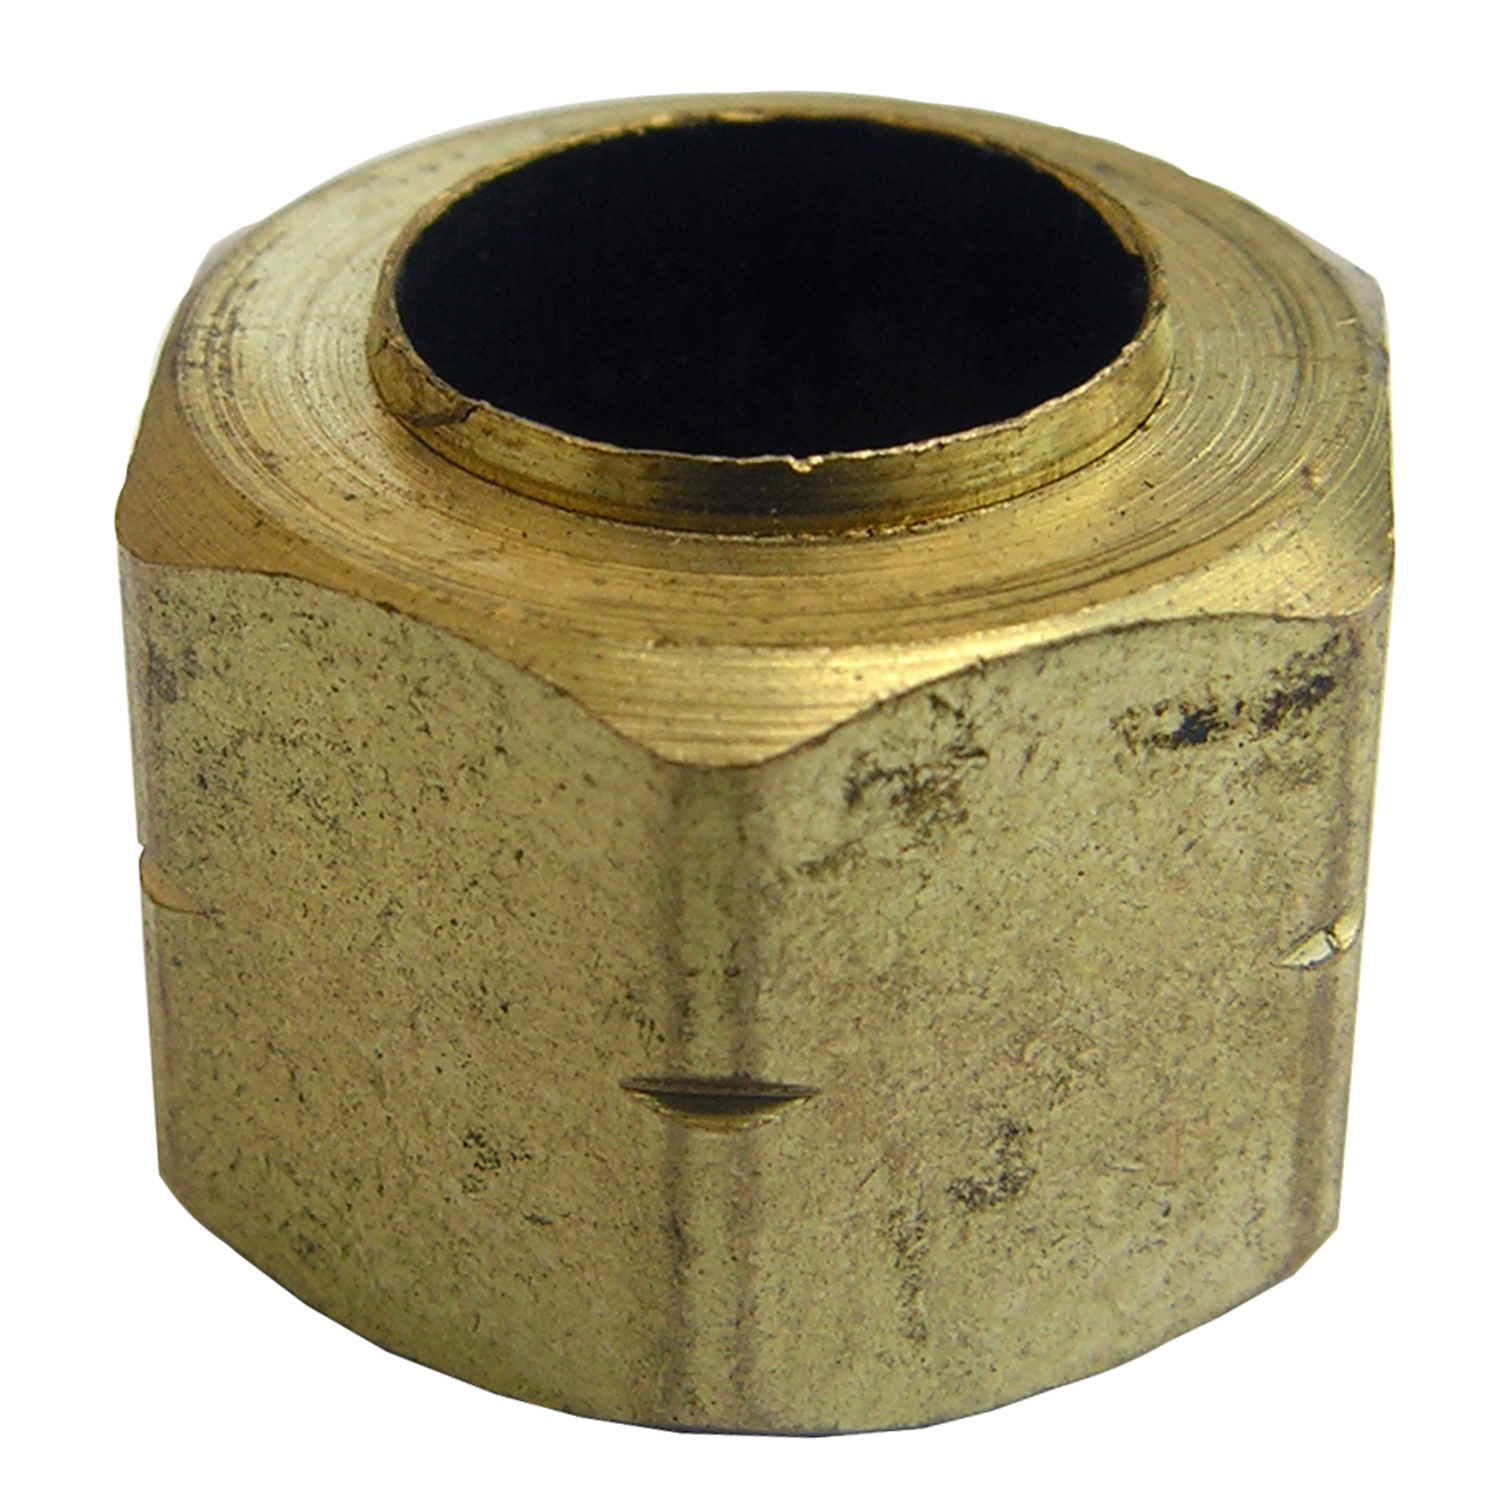 Lasco 17-6117 Nut and Sleeve, 1/4 in, Compression, Brass